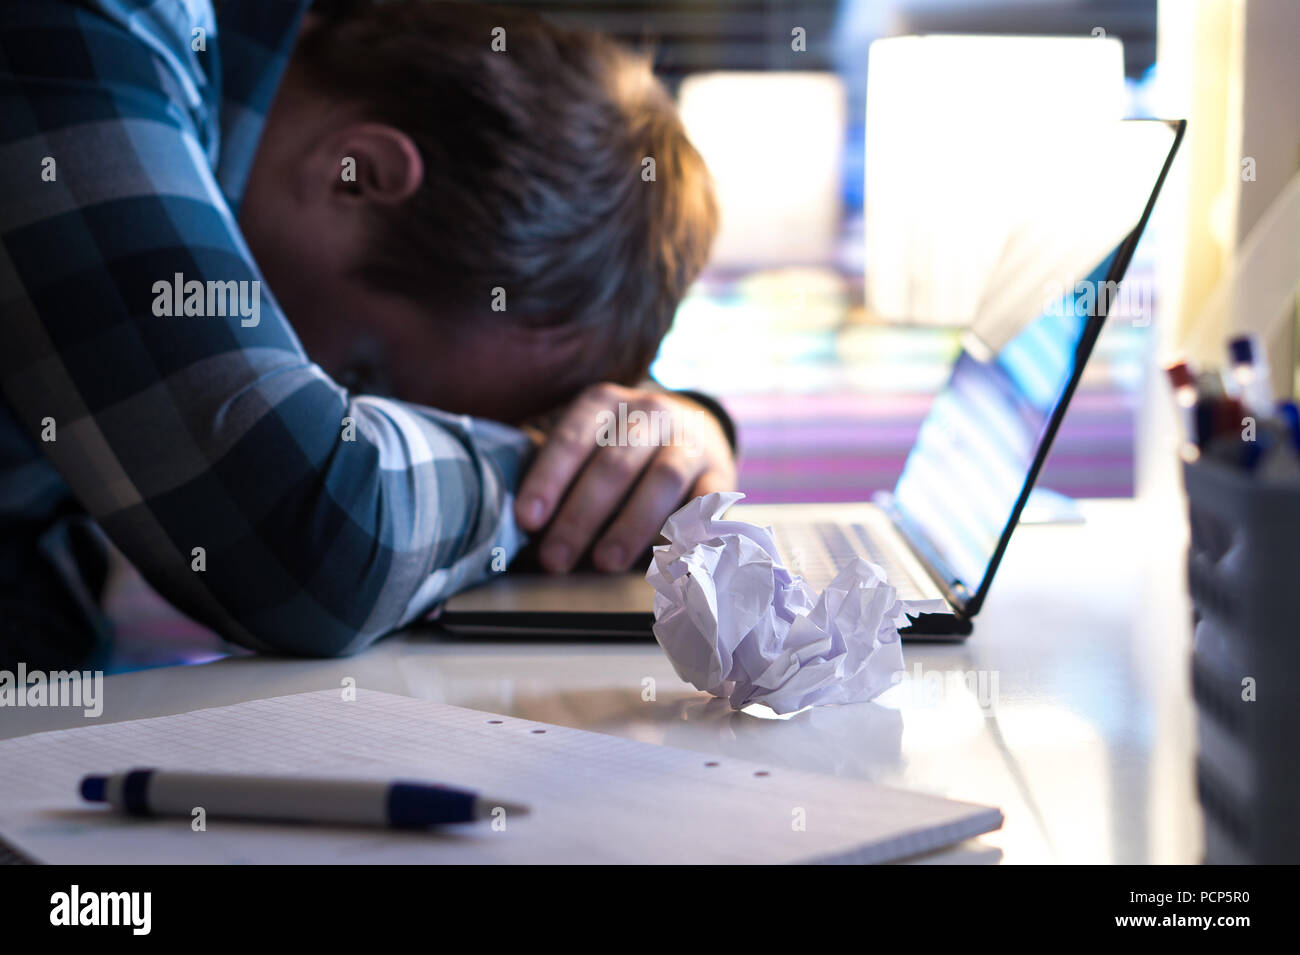 Sad and tired man in home or modern business office at night. Unemployed job seeker or businessman with ripped paper and laptop on table. Stock Photo